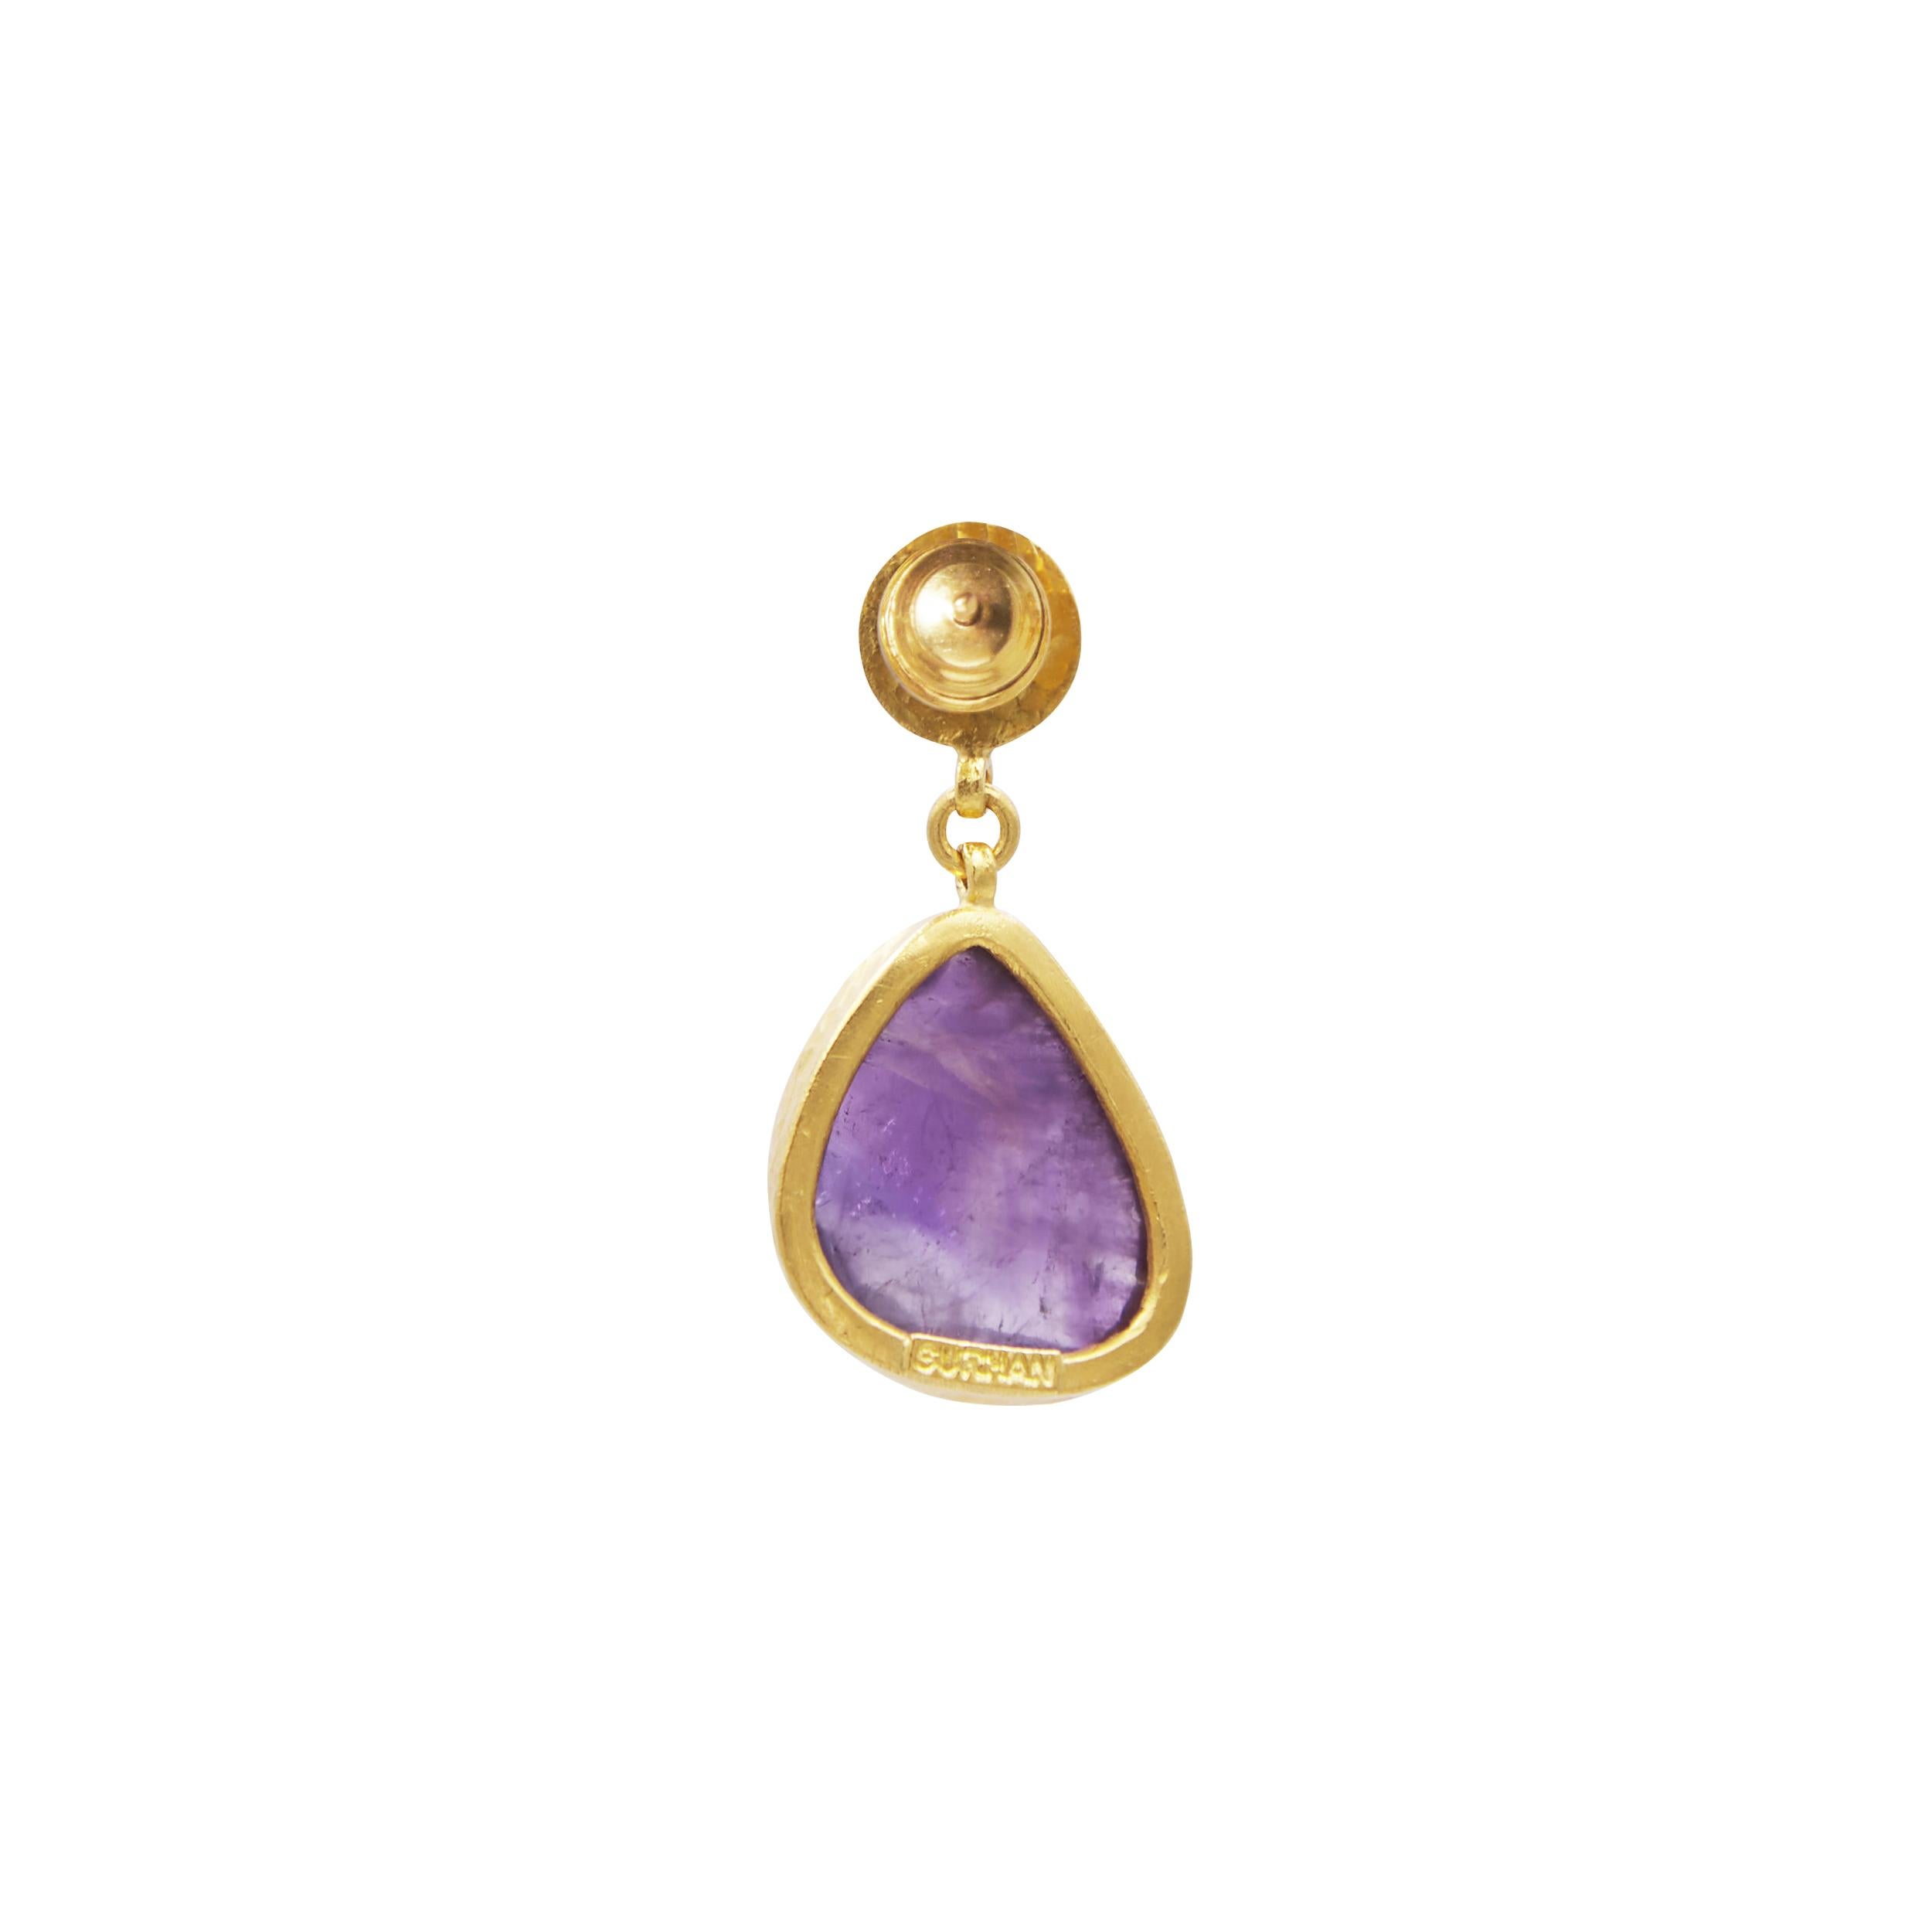 Contemporary GURHAN 22-24 Karat Hammered Yellow Gold and Faceted Amethyst Drop Earrings